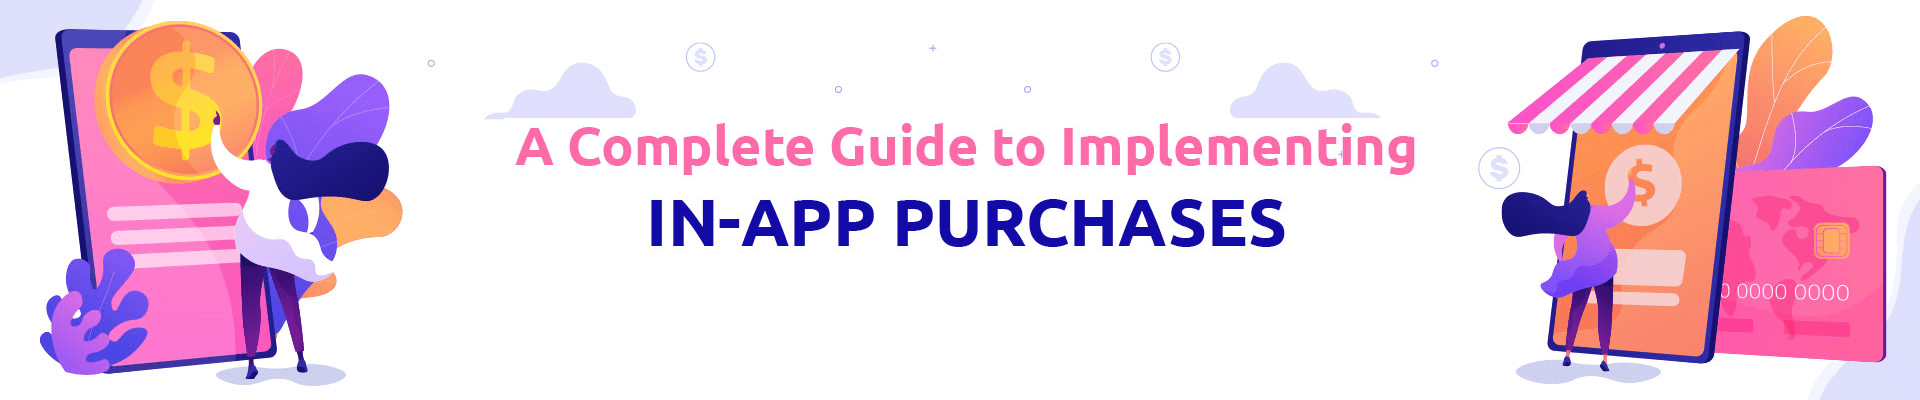 Guide To Implementing In-App Purchases For IOS And Android